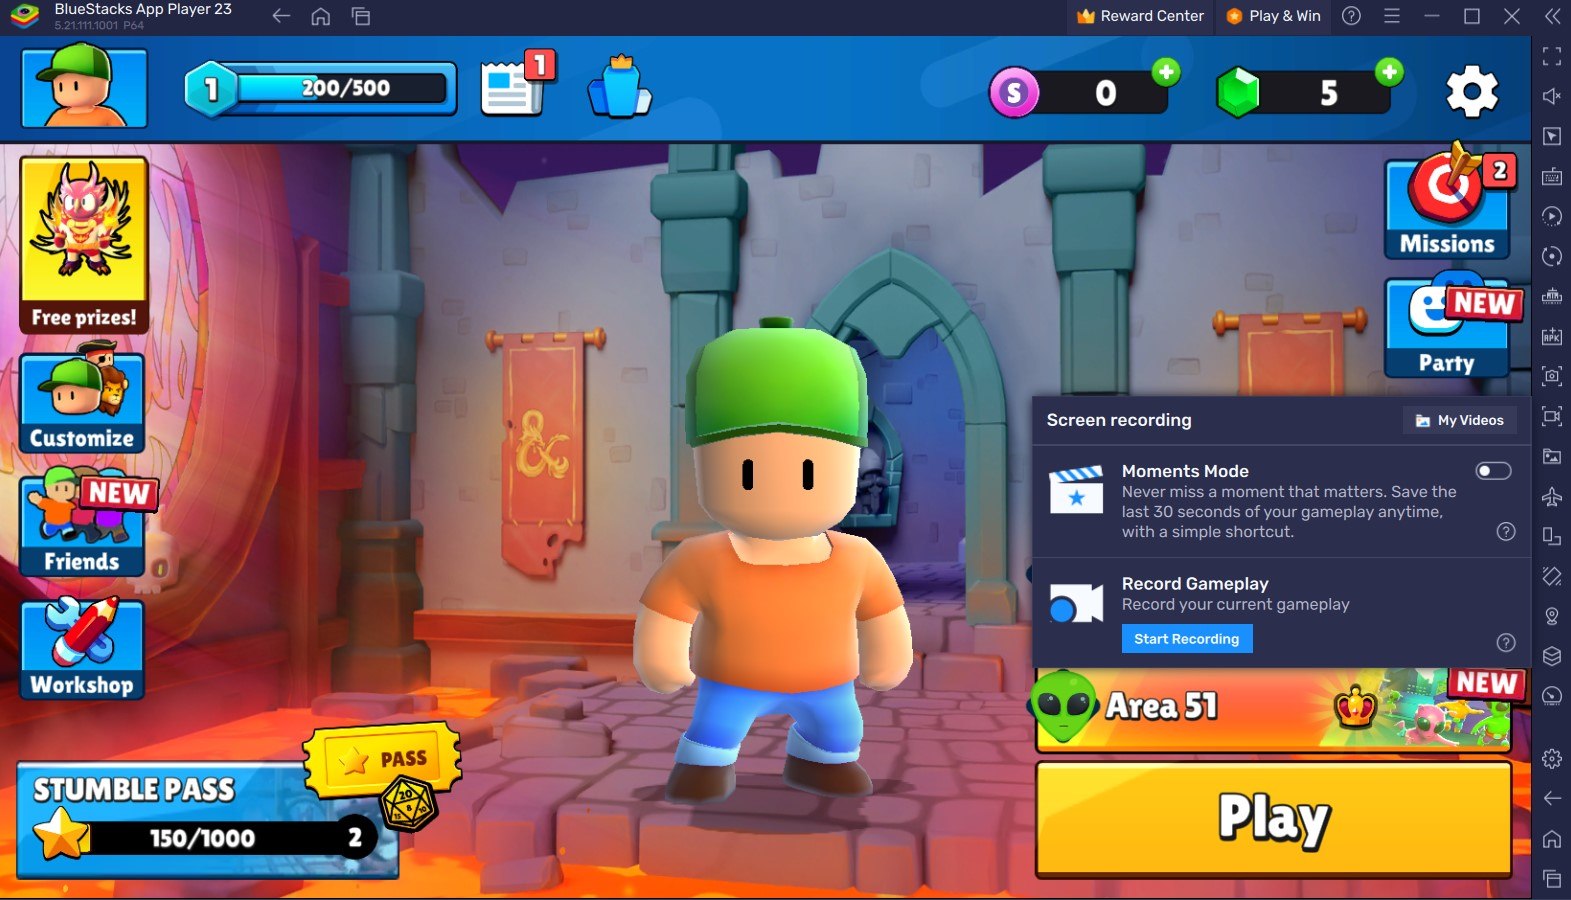 BlueStacks Features to Enhance your Stumble Guys Gameplay Experience